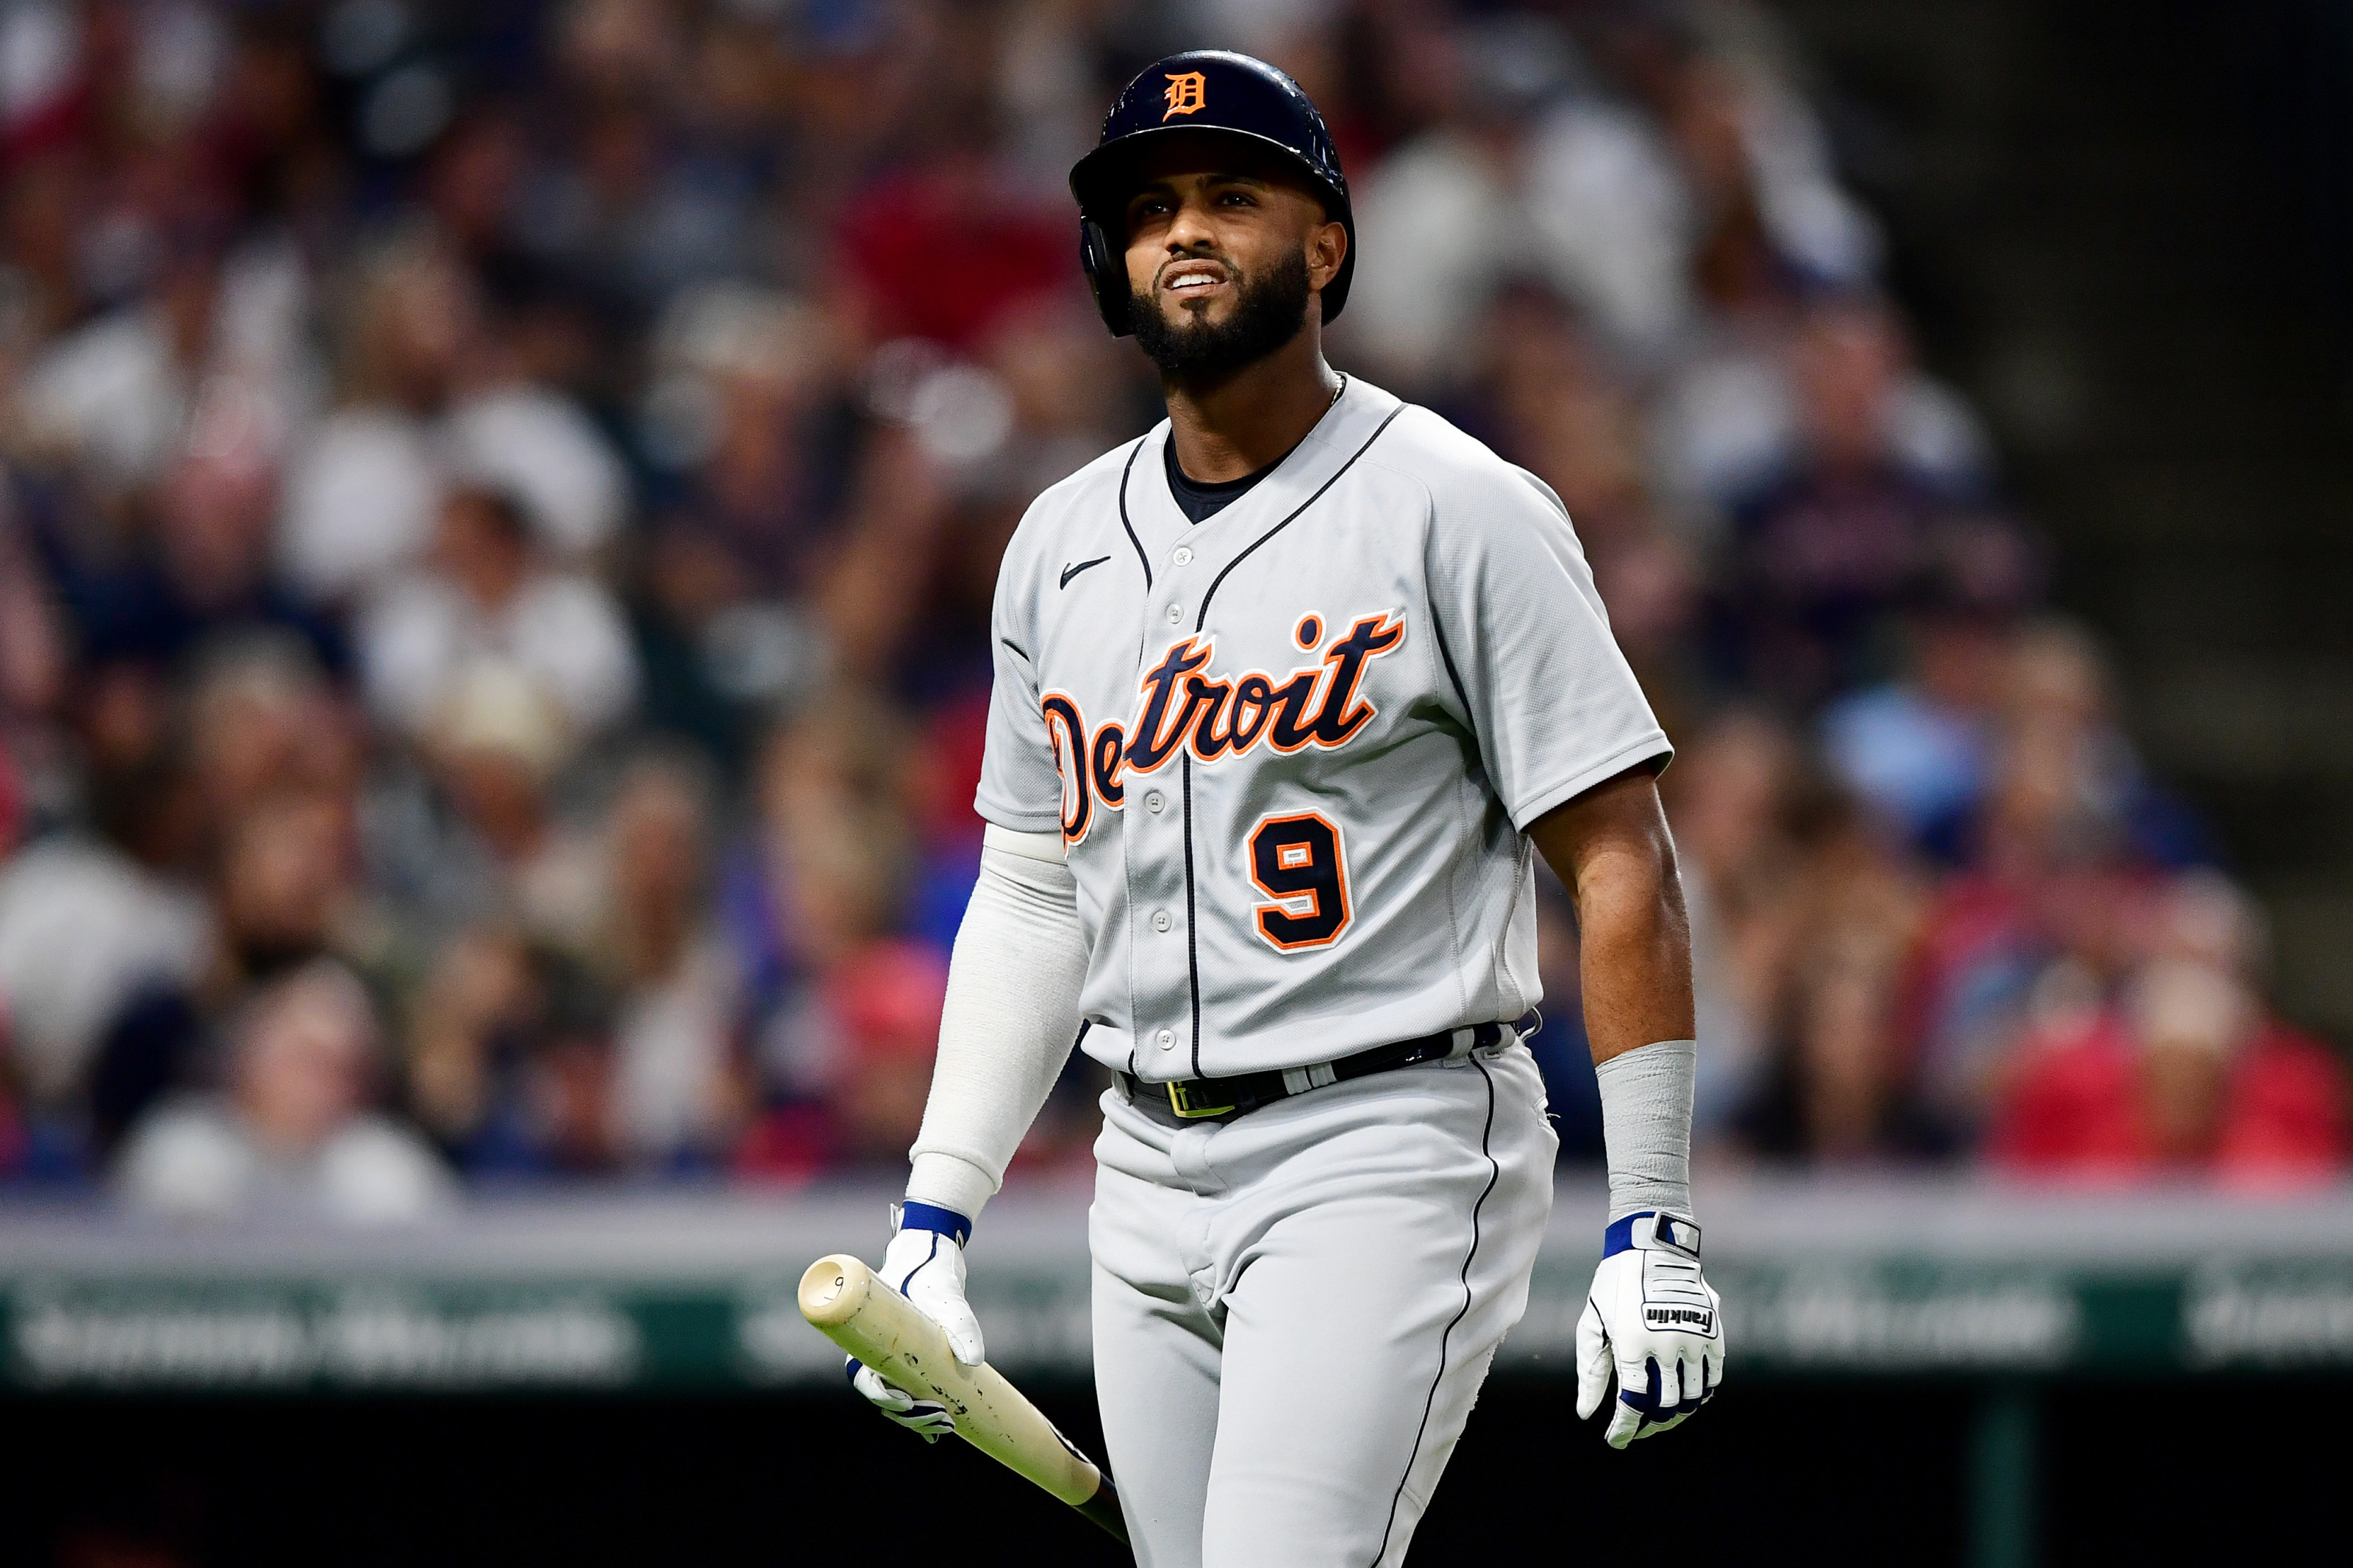 Willi Castro's future with the Detroit Tigers appears in doubt